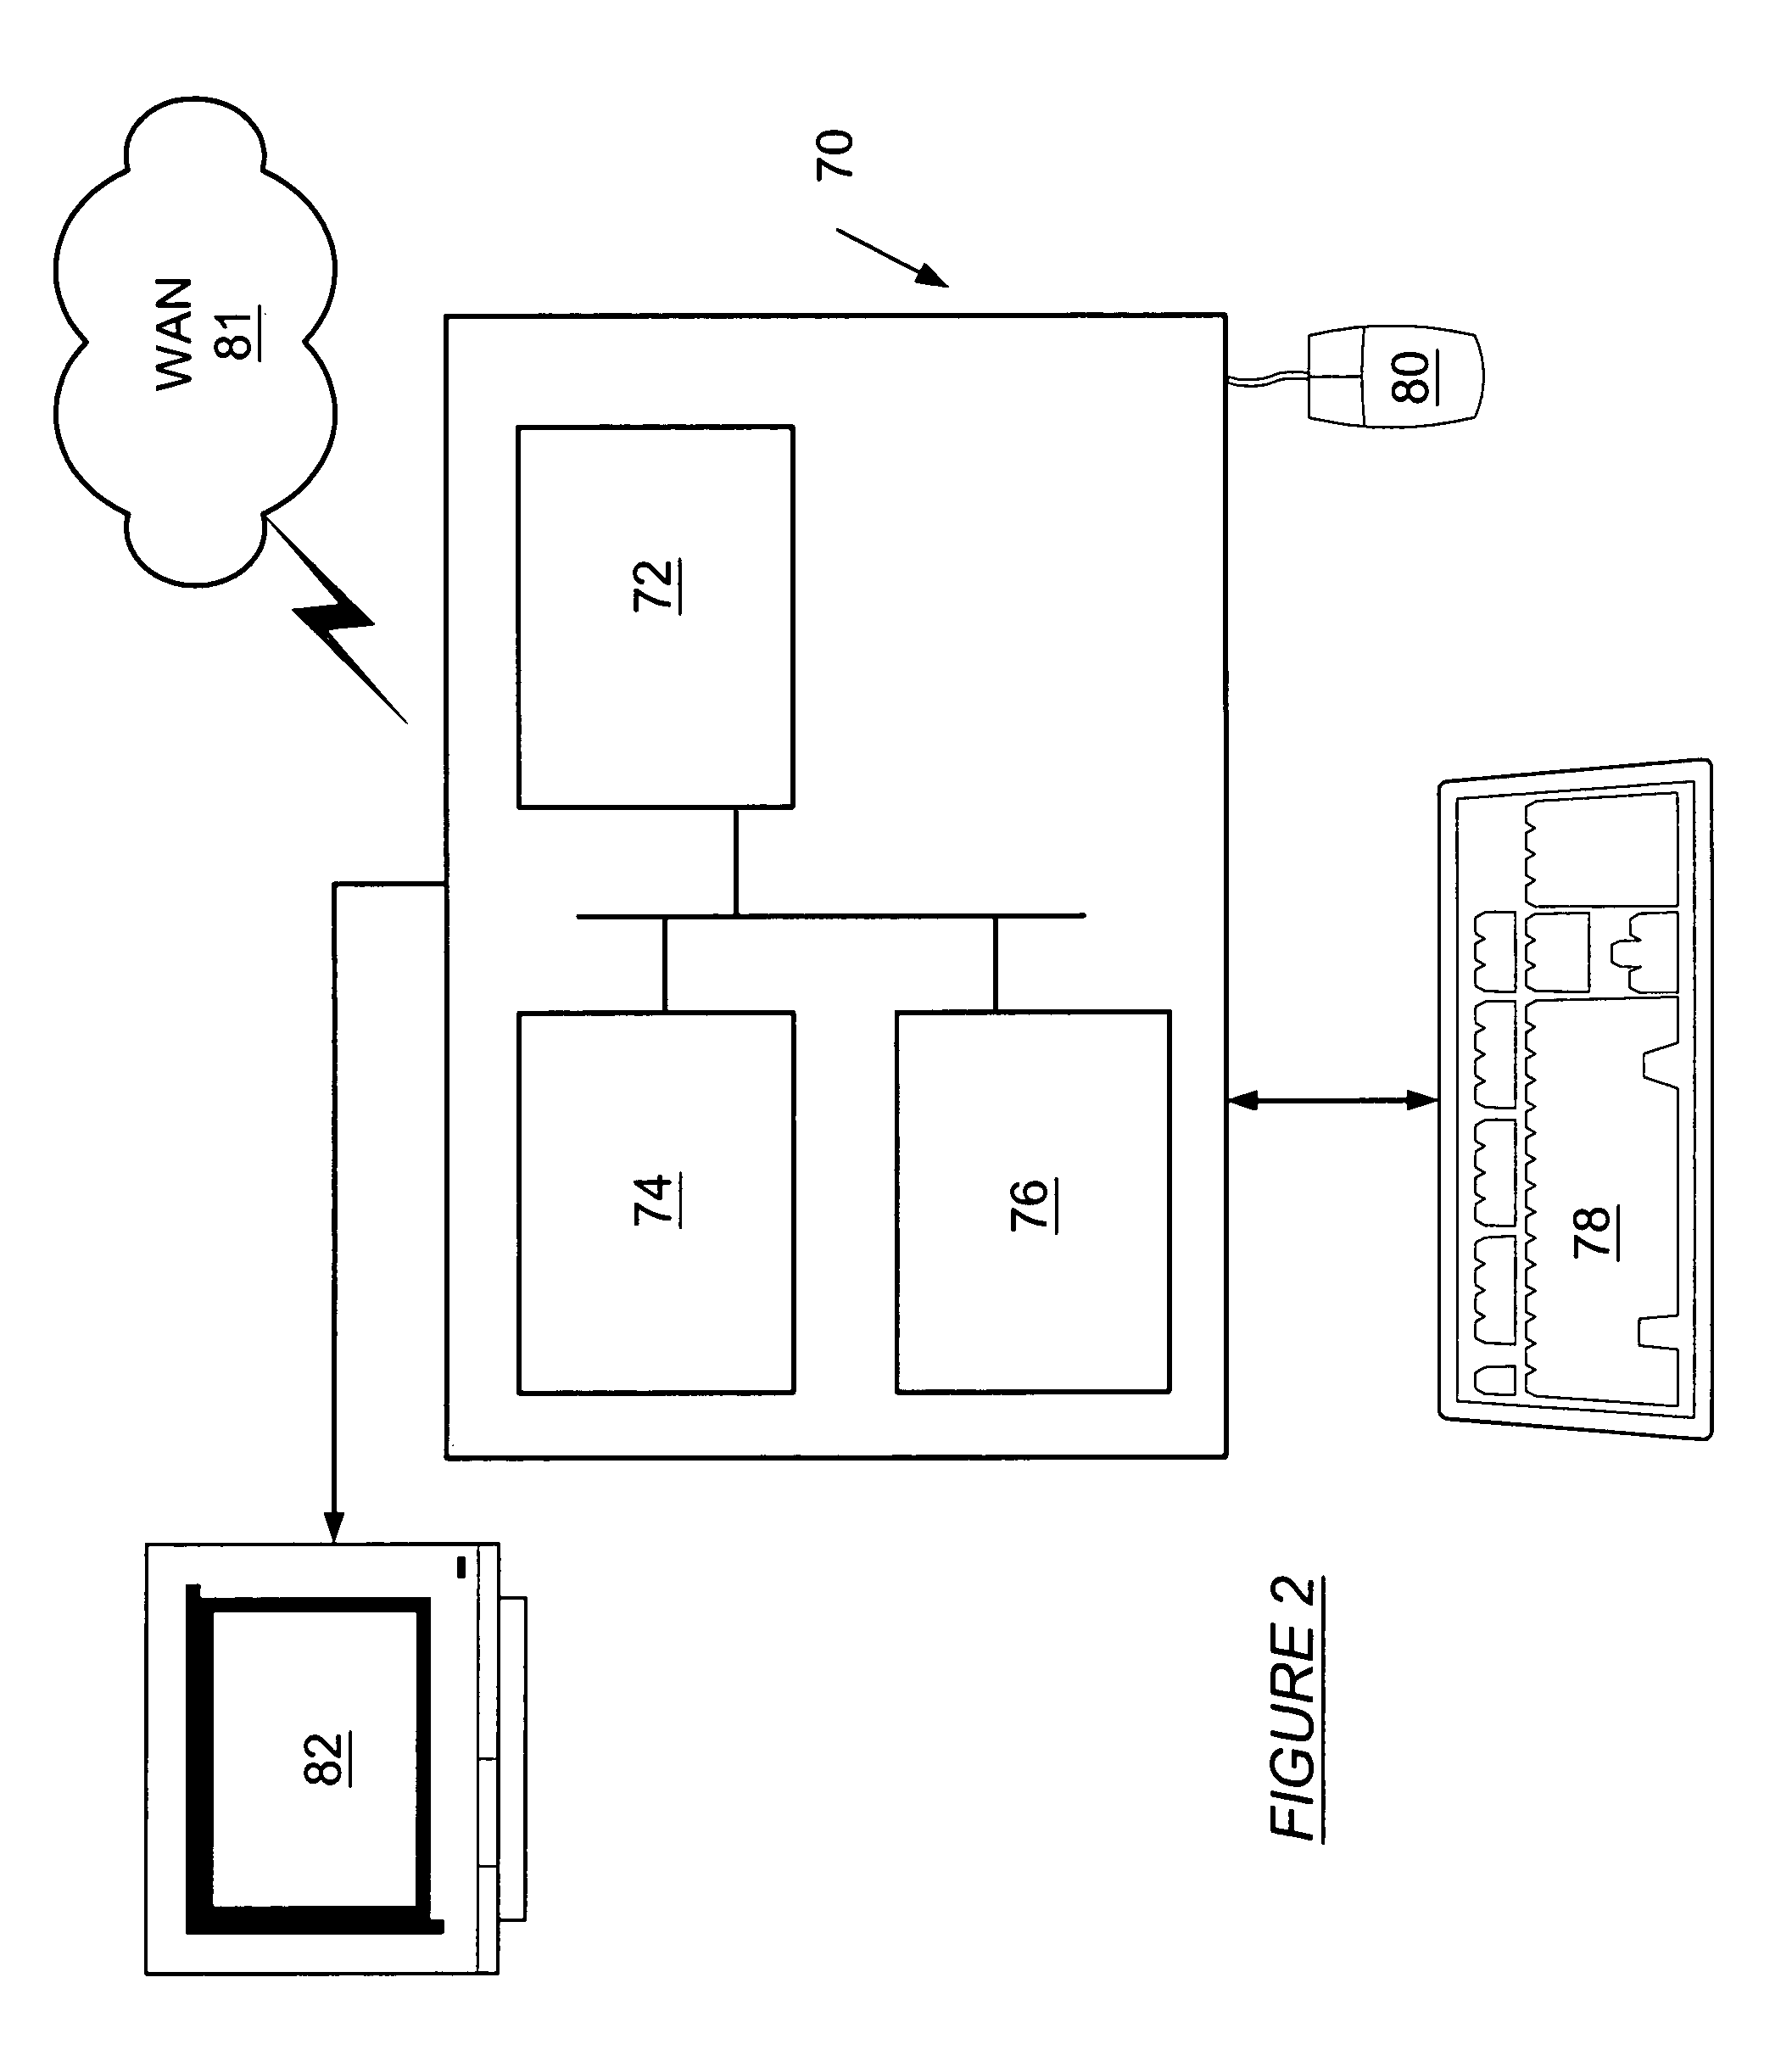 Method and apparatus for re-encrypting data in a transaction-based secure storage system